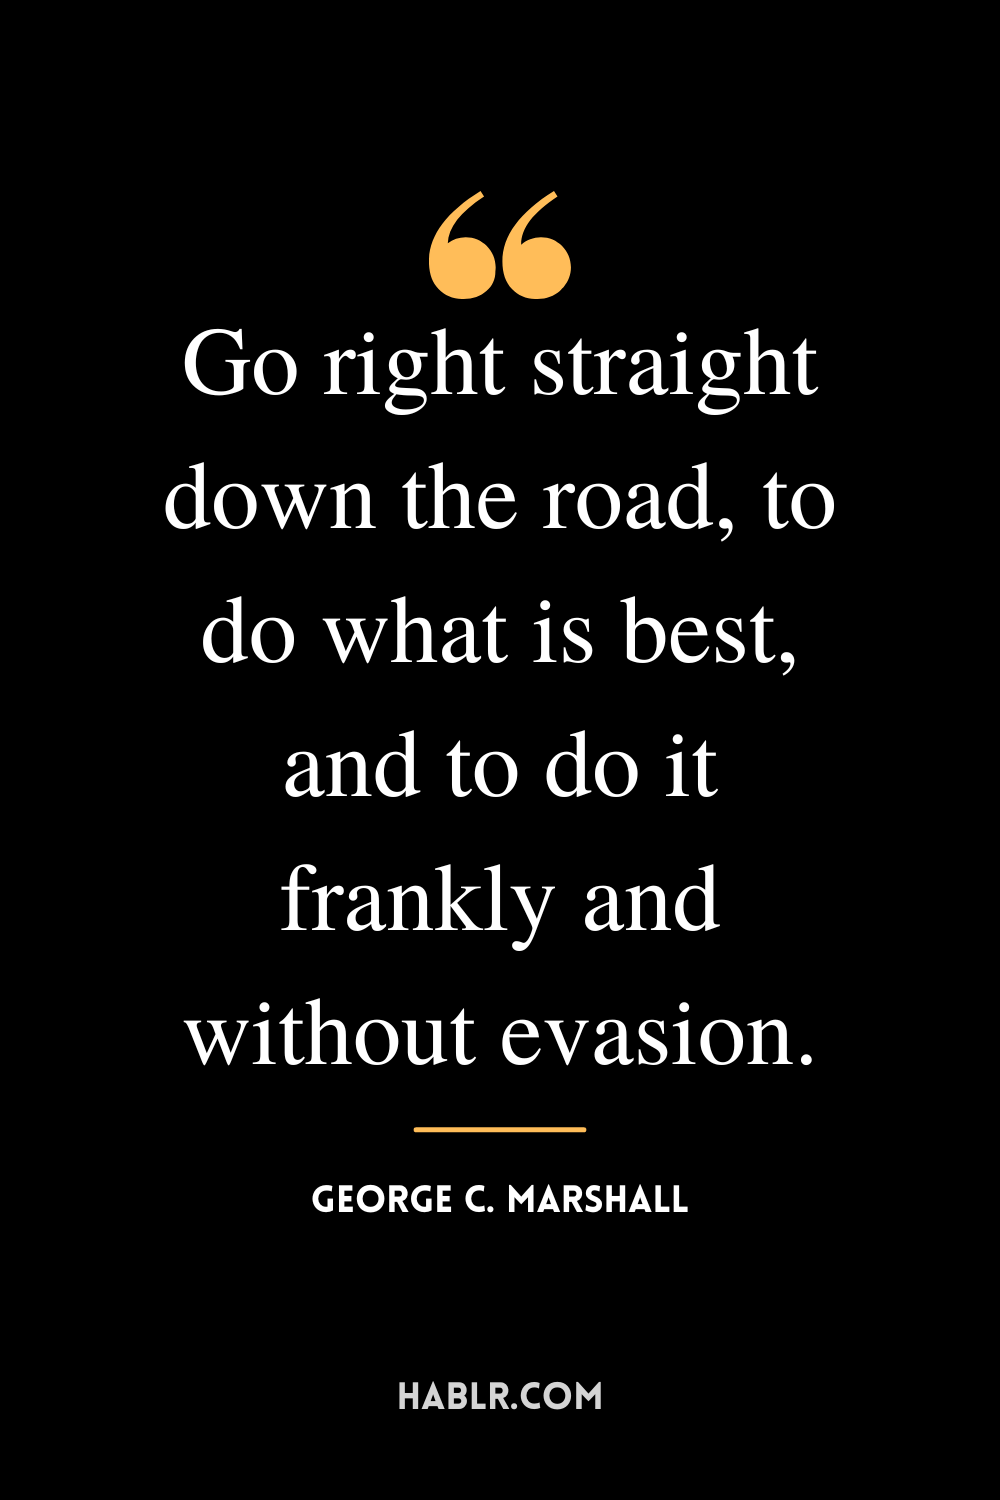 “Go right straight down the road, to do what is best, and to do it frankly and without evasion.”-George C. Marshall